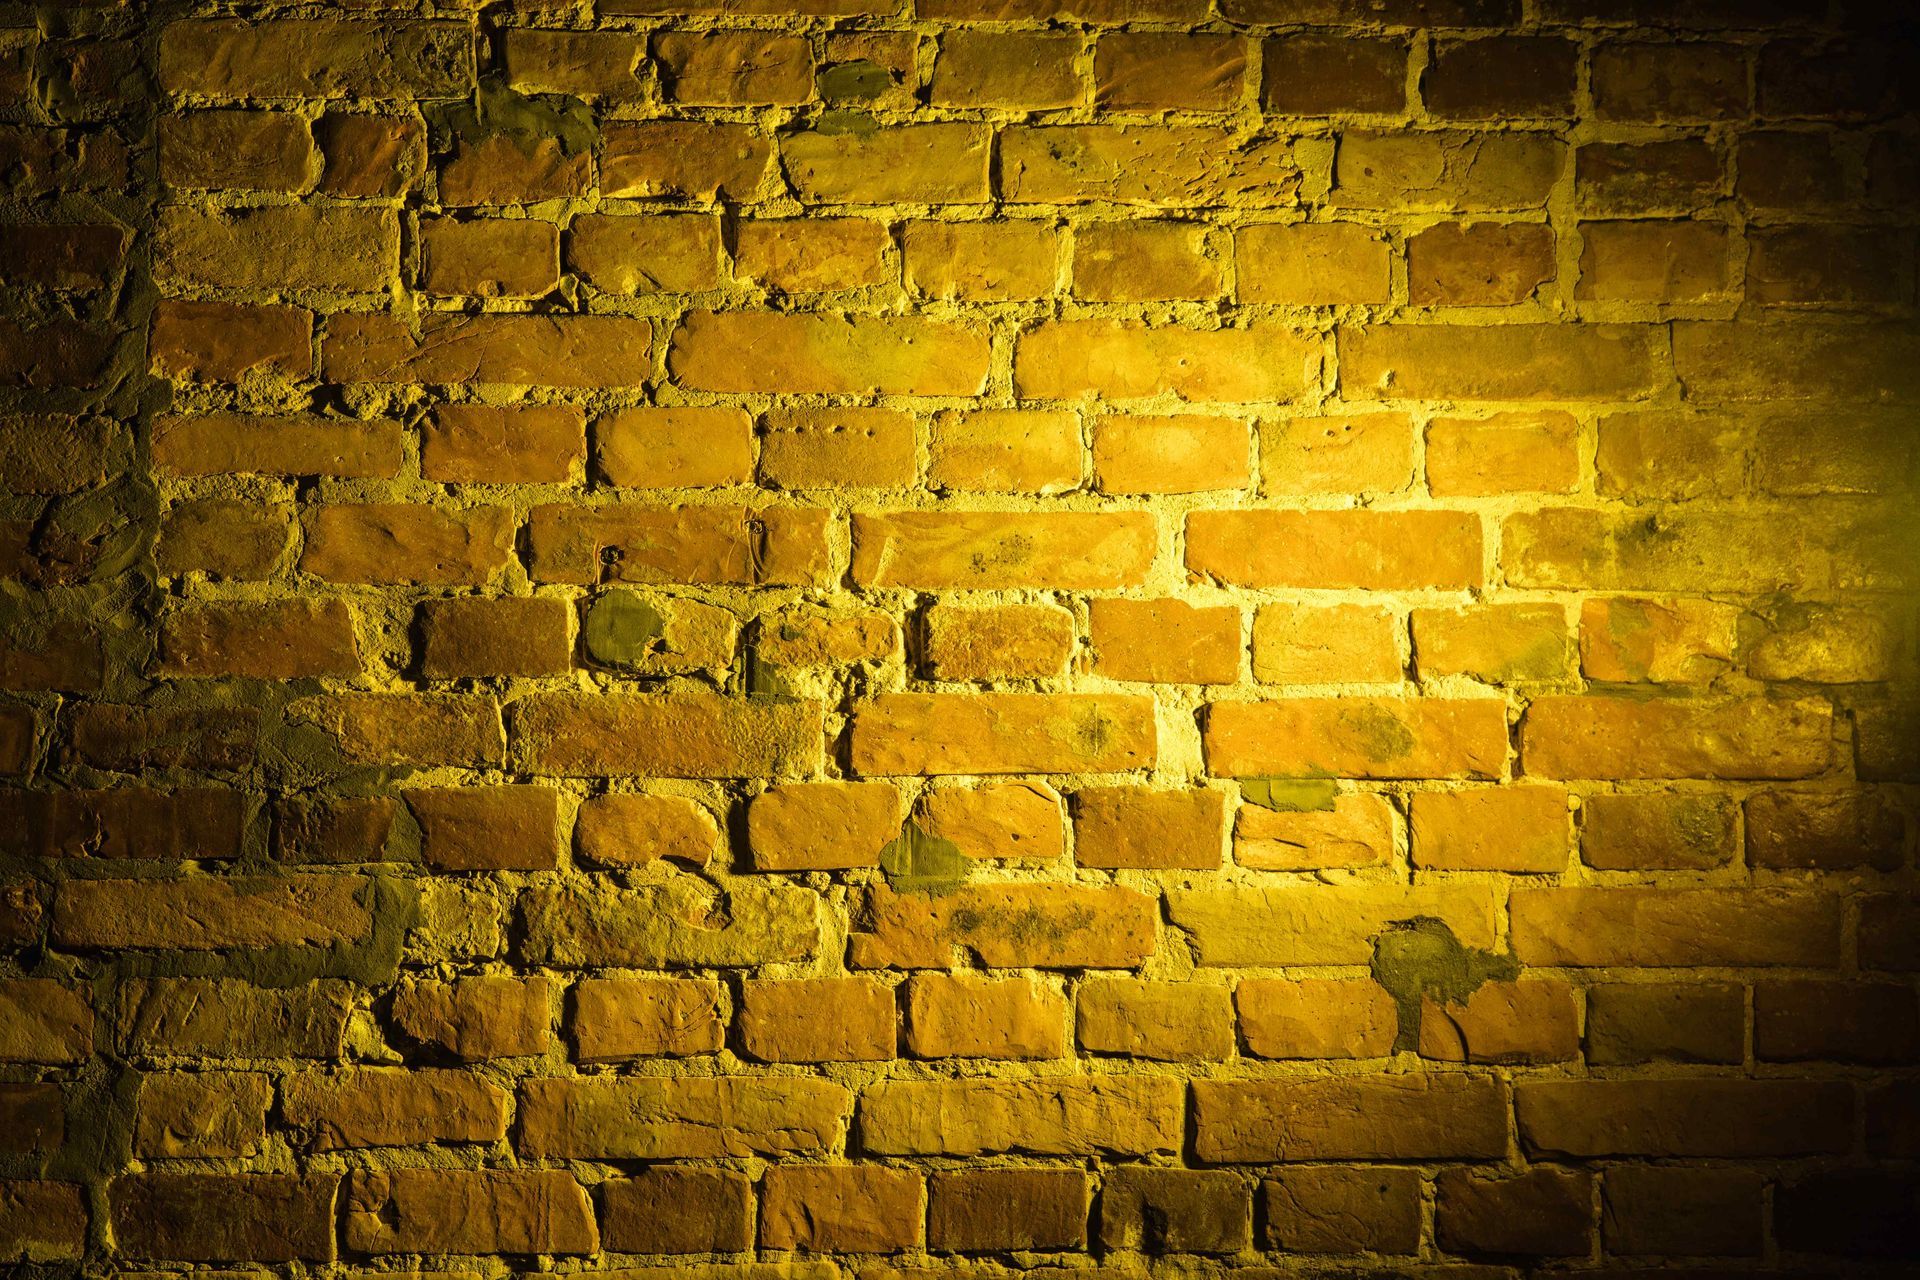 High contrast lighting bathes a crumbling brick foundation.